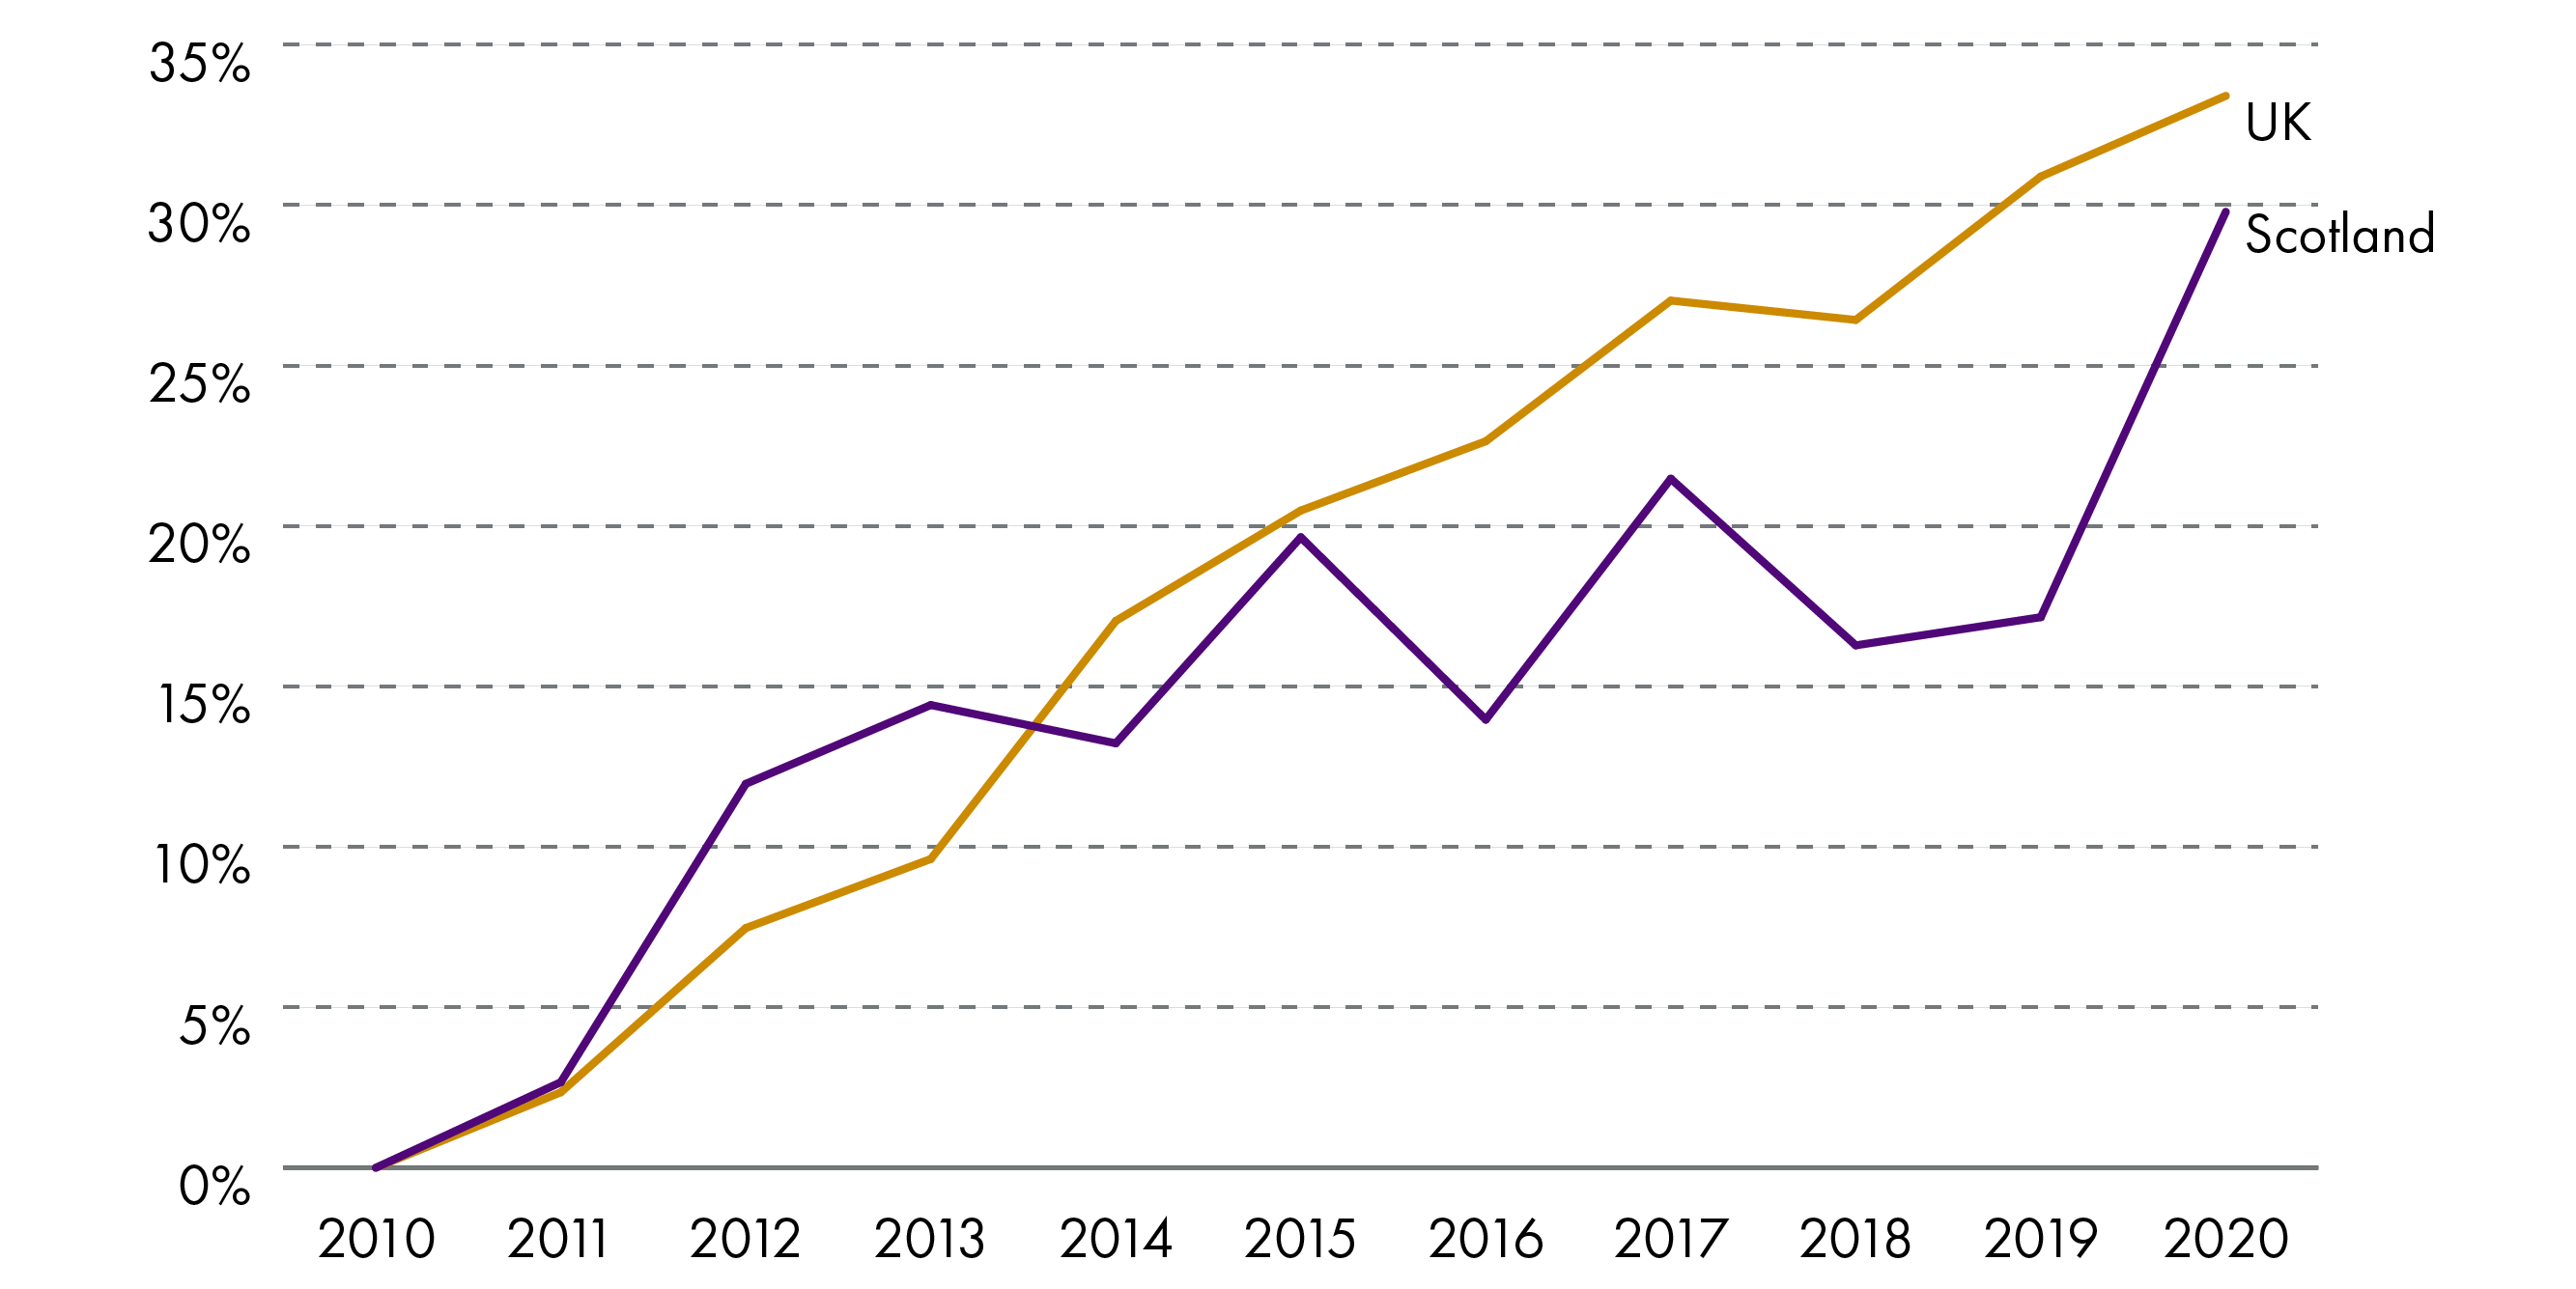 Between 2010 and 2020, the chart shows the UK private sector business base has grown steadily with a notable incline trend. In comparison, trends in the Scottish private sector business base have been much more sporadic.